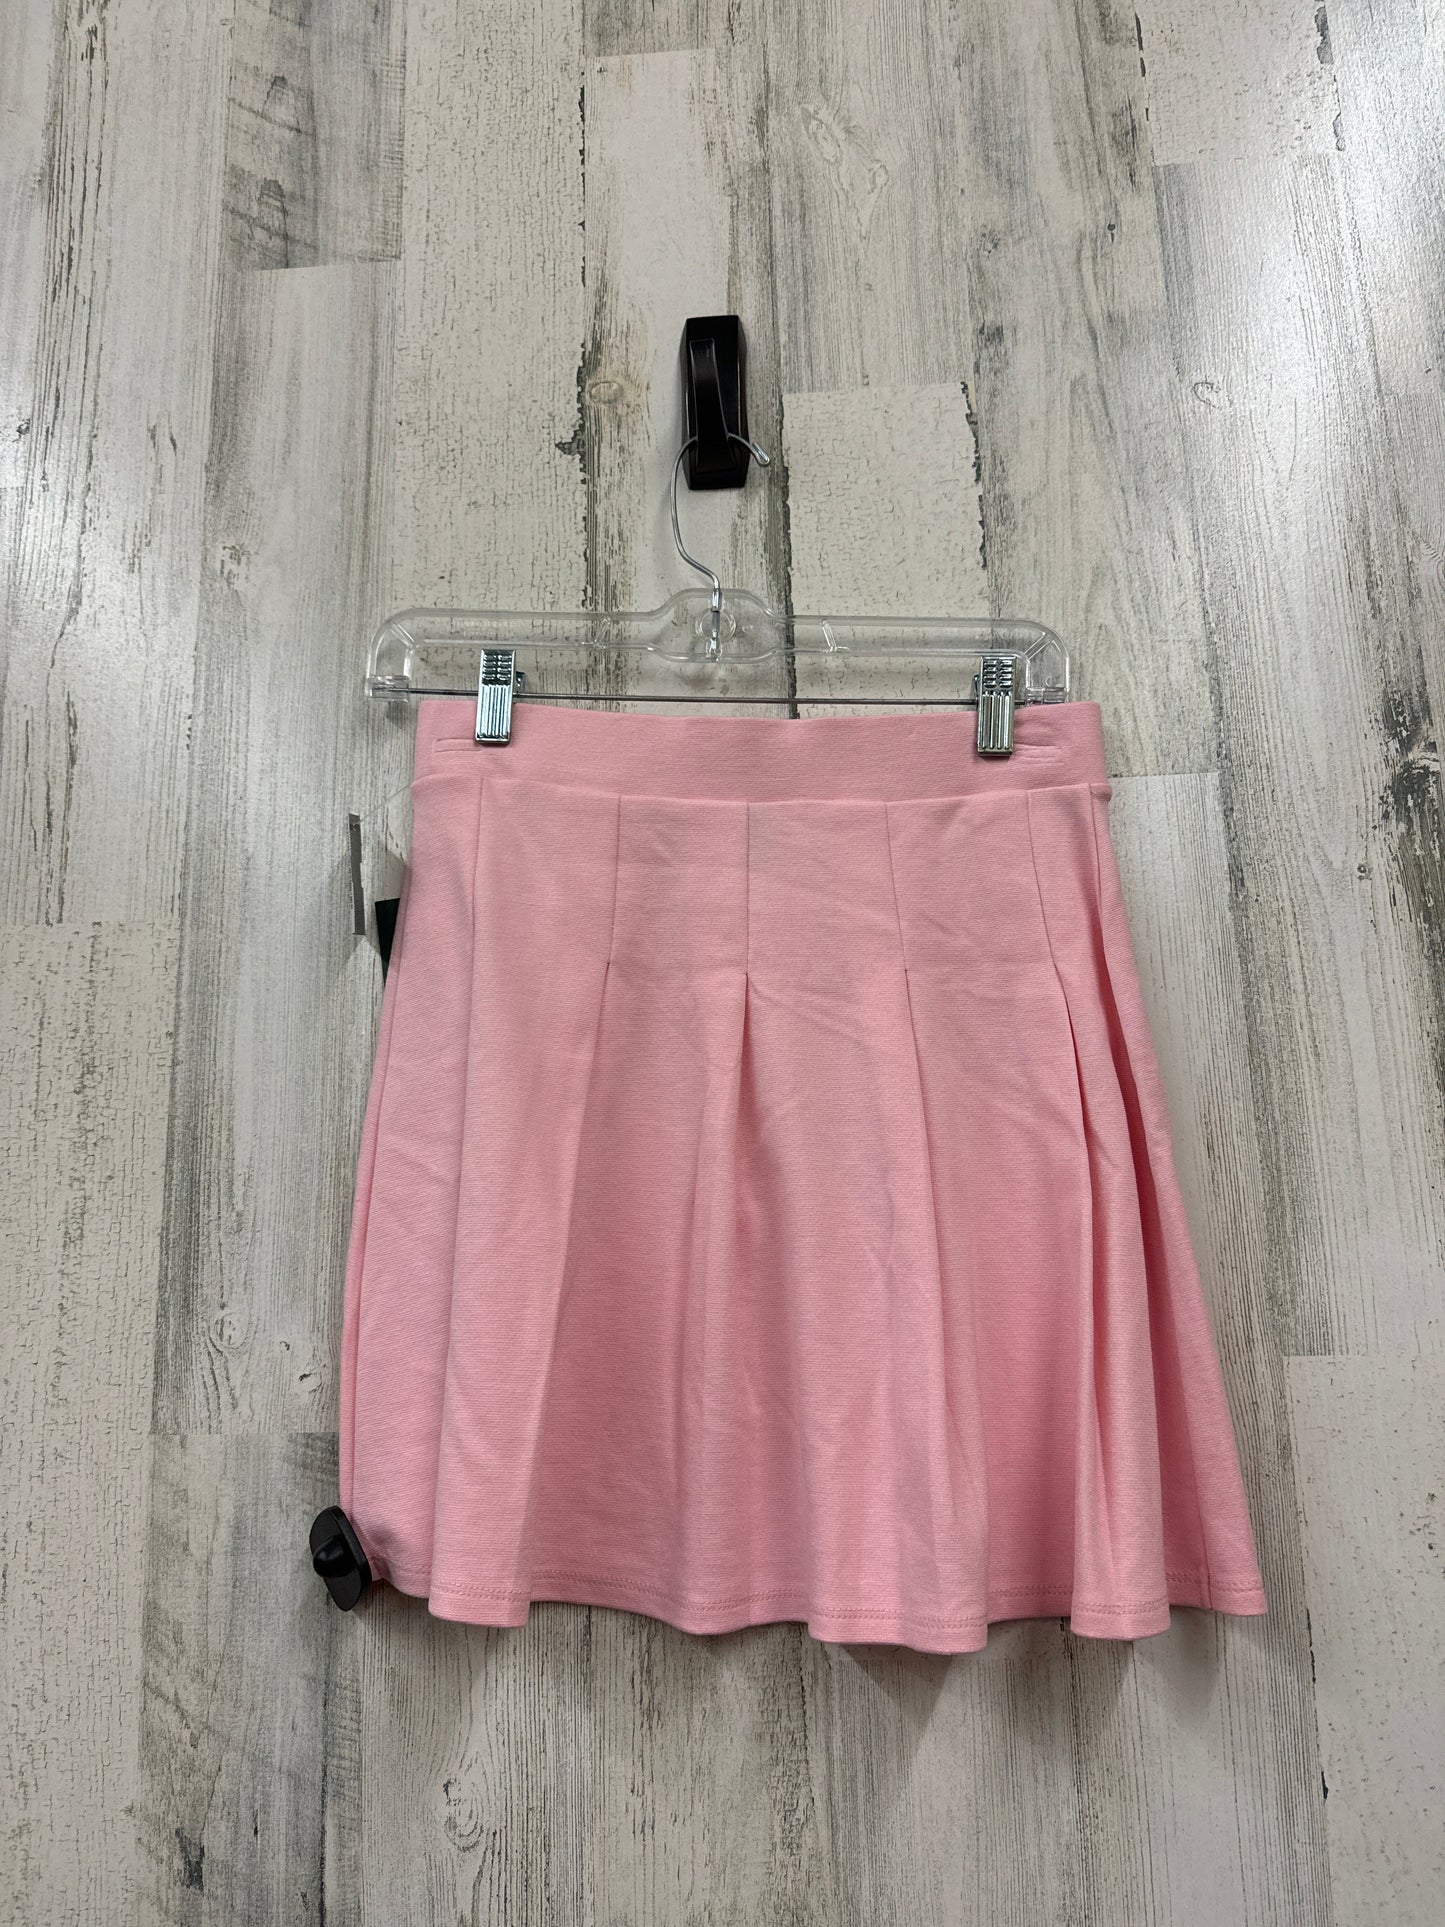 Skirt Mini & Short By Wild Fable  Size: Xs